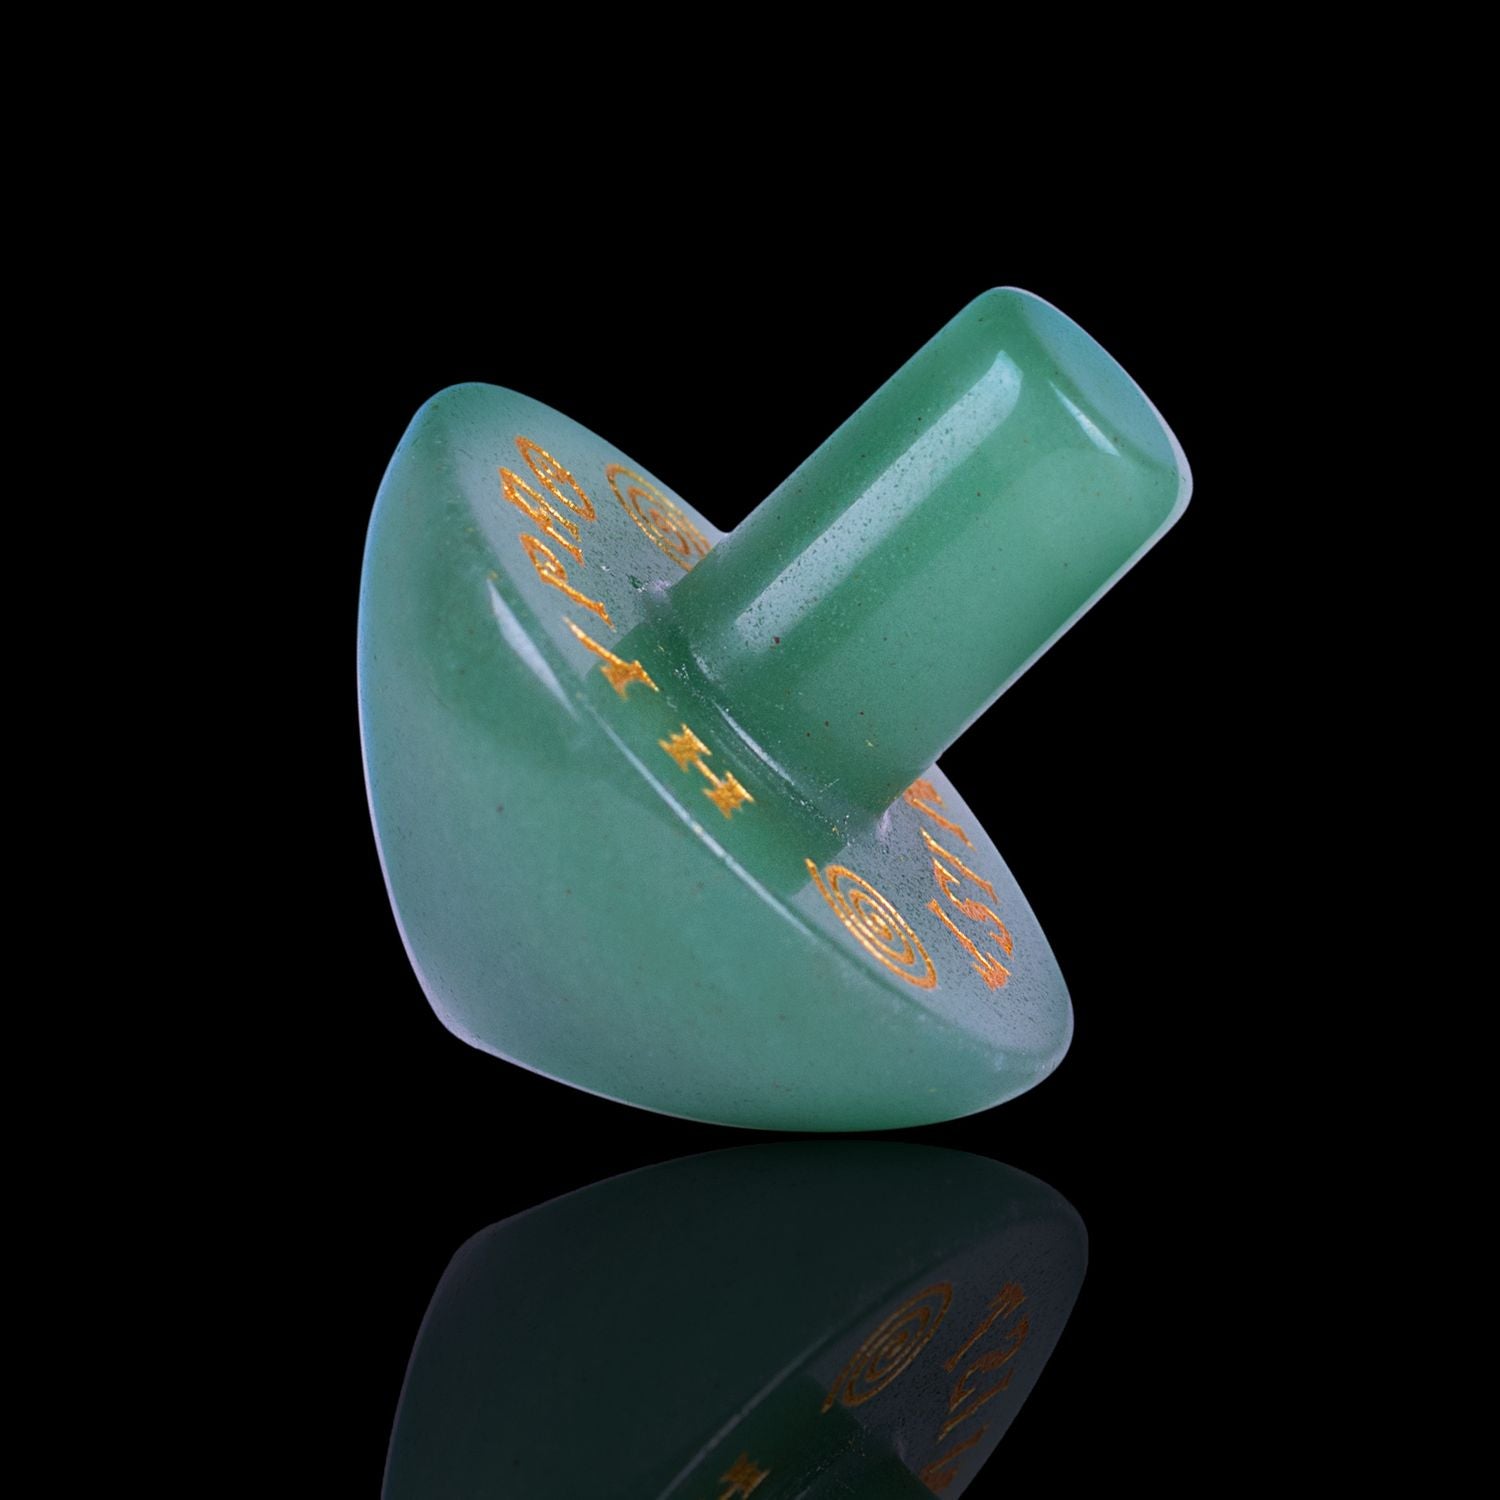 Naturally Wicked Exclusive Hypnotwister. A Green Aventurine Crystal Spinning Top Engraved With Hypno Twist